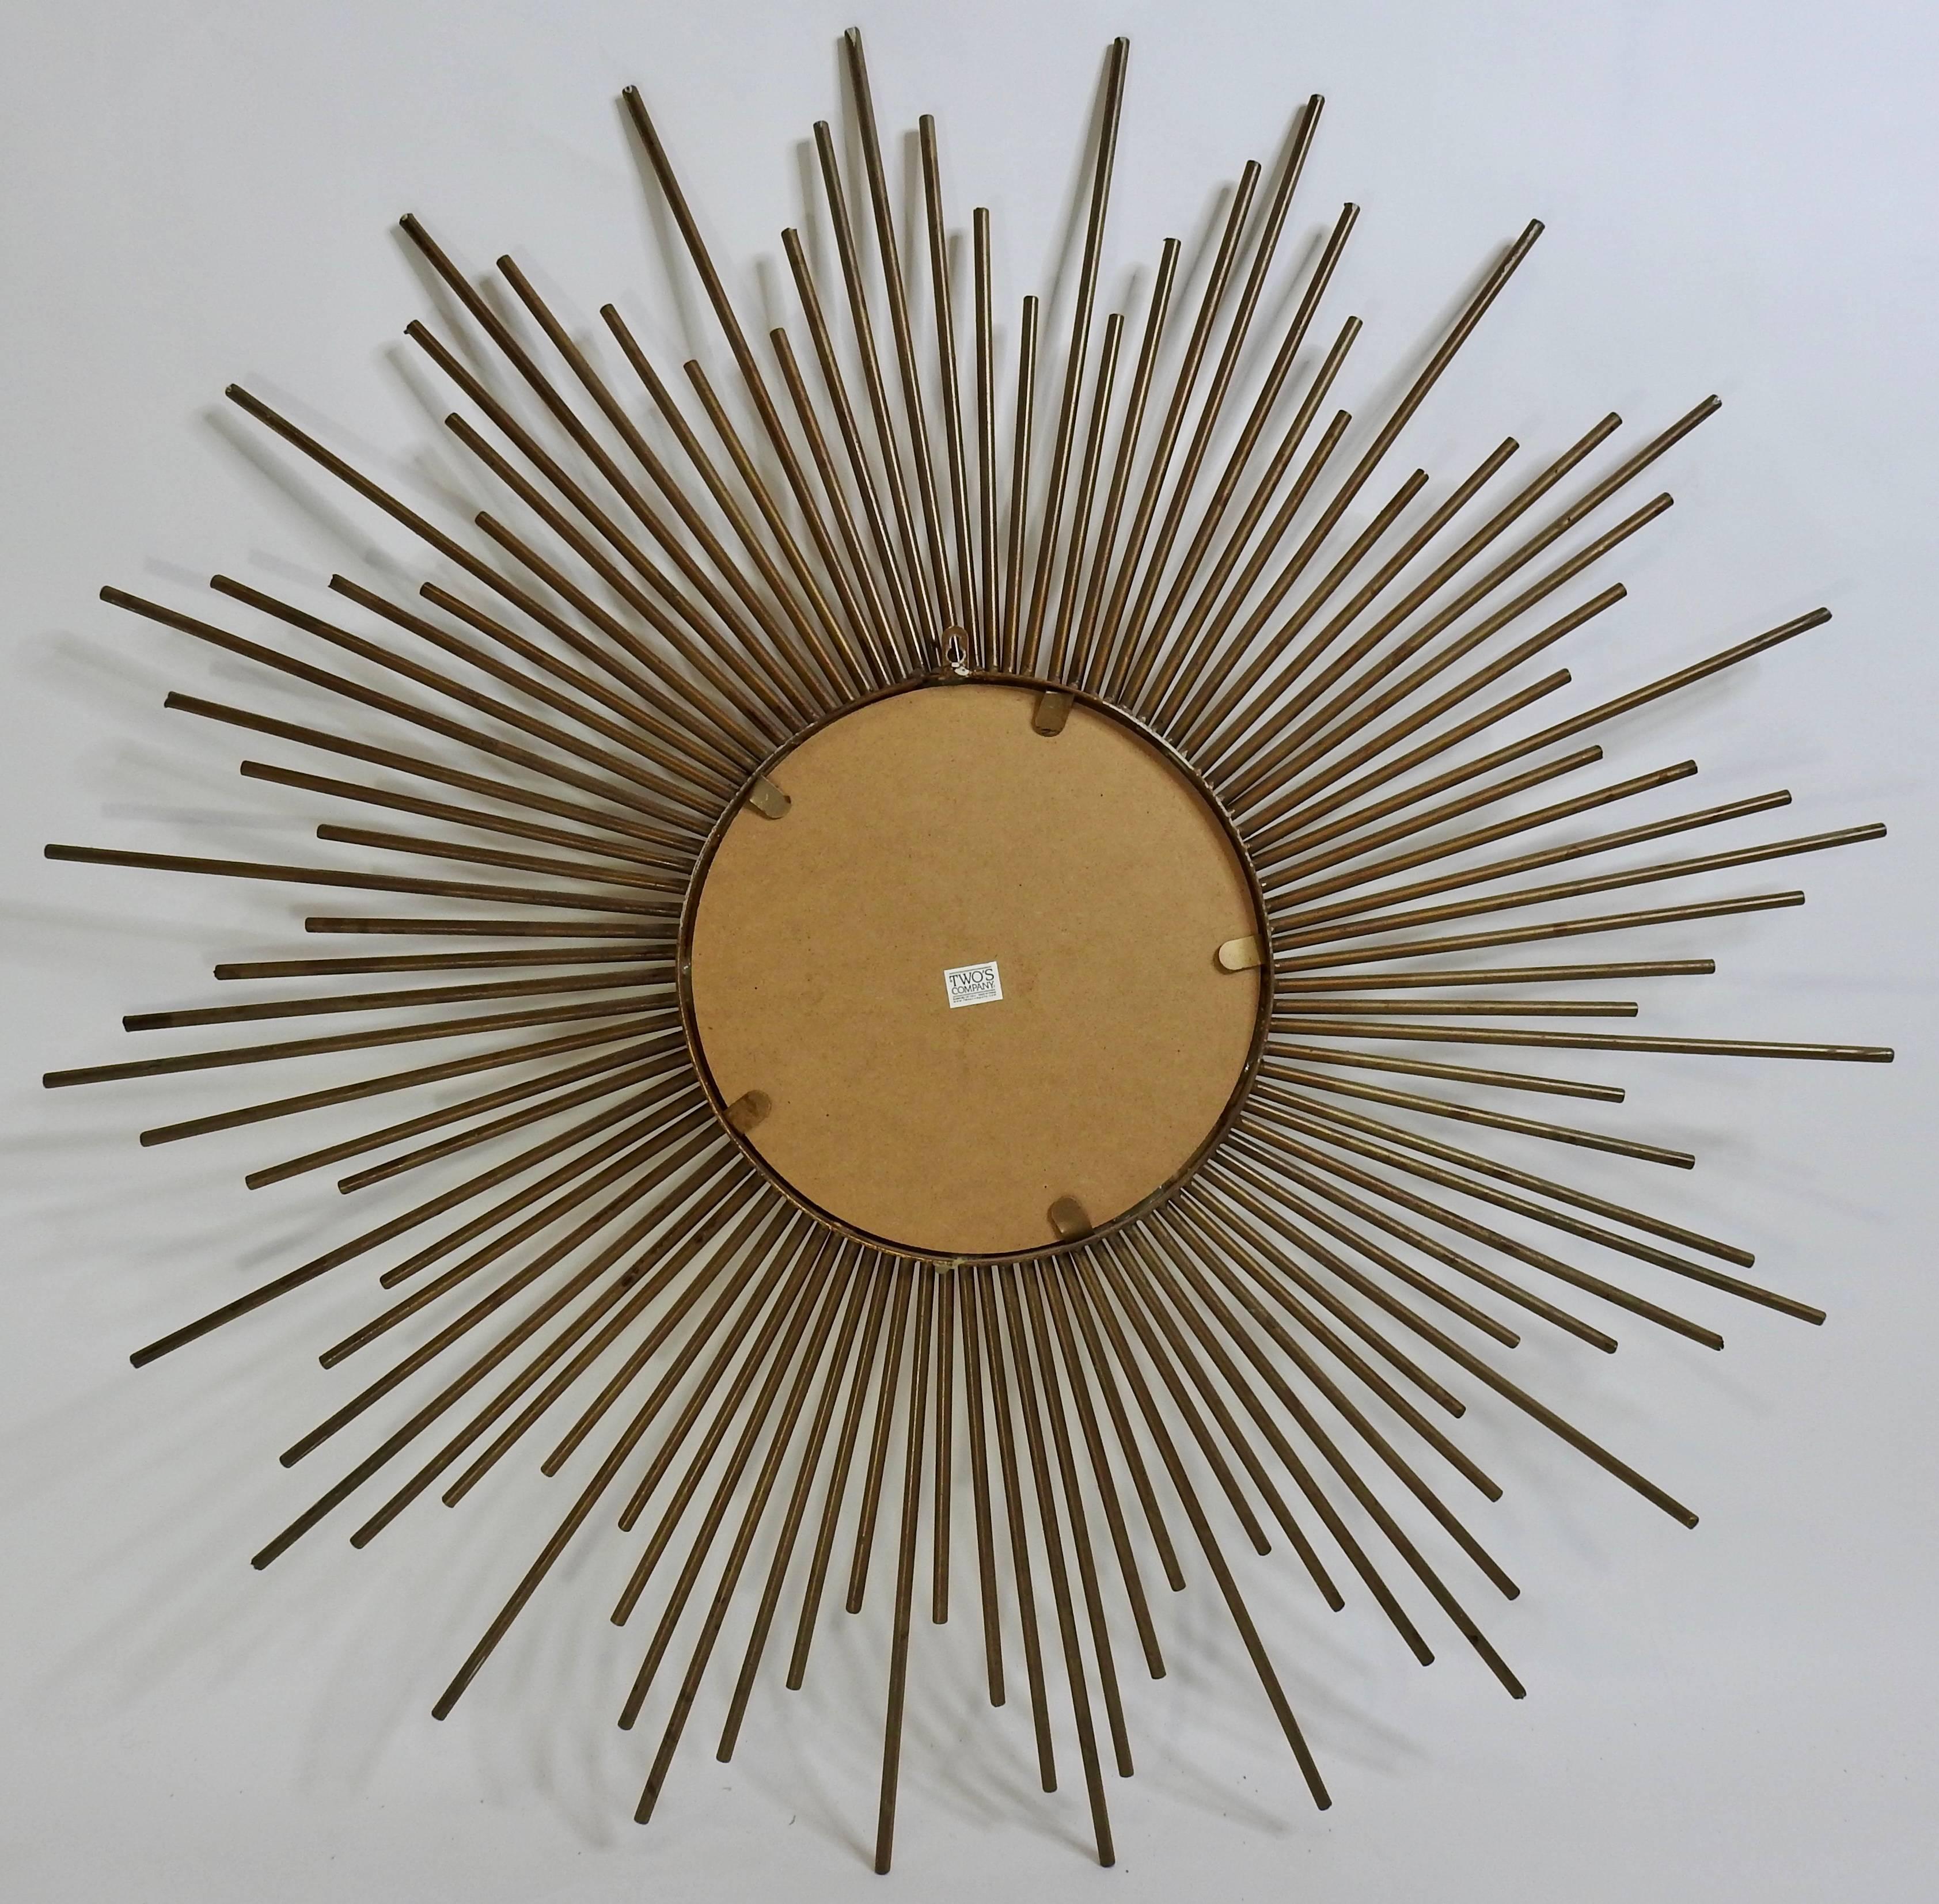 A vintage inspired starburst mirror. This mirror features a starburst frame, made of various length pieces of gold tone metal, with a round mirror in the centre. A “Two’s Company” sticker is on the back of the piece.